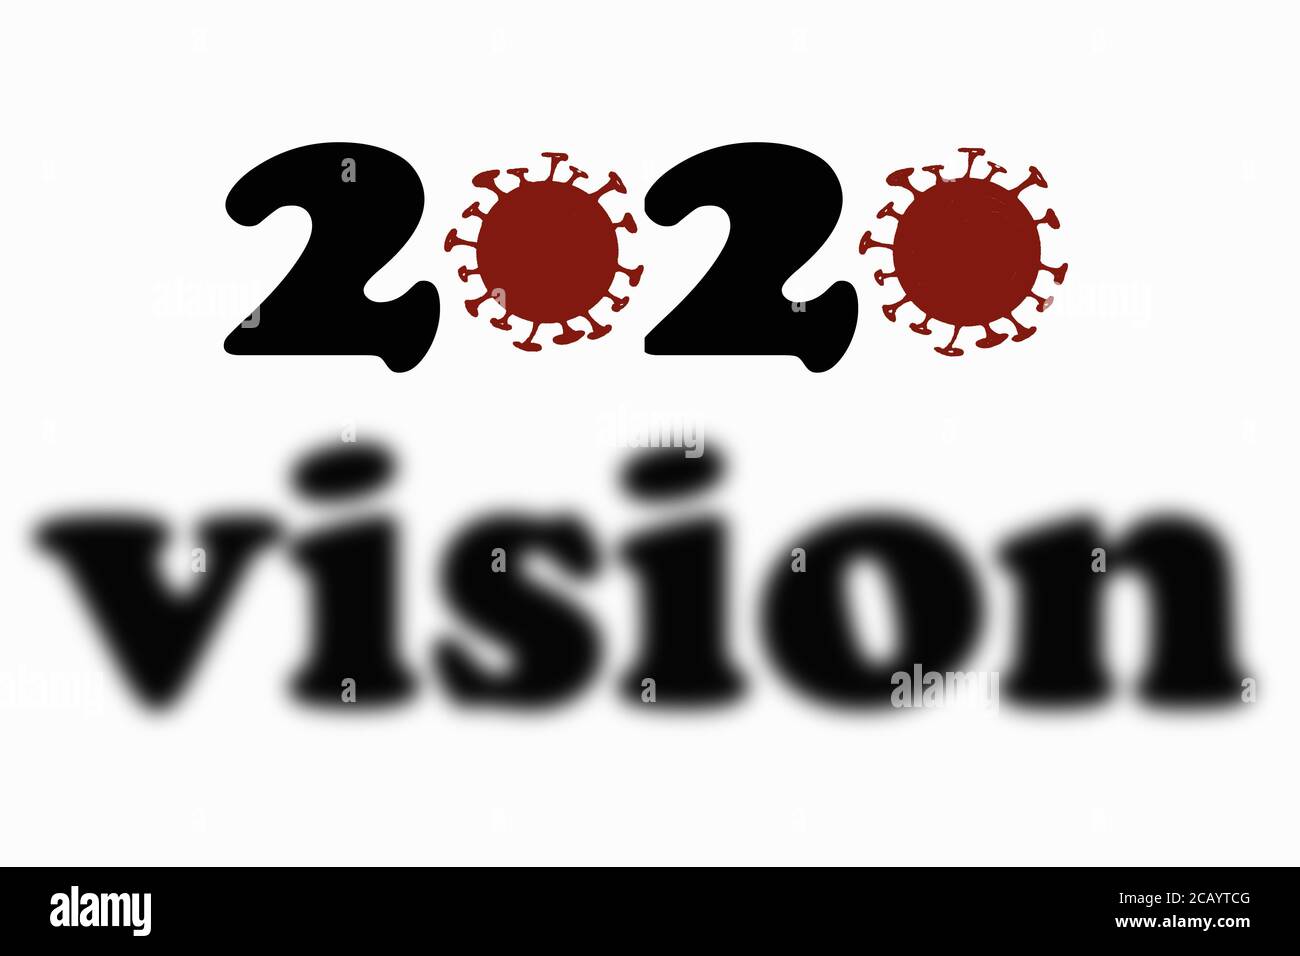 Text graphic reads '2020 vision' with blurred text, concept for unclear information, unknown future related to COVID-19, coronavirus, year 2020 Stock Photo